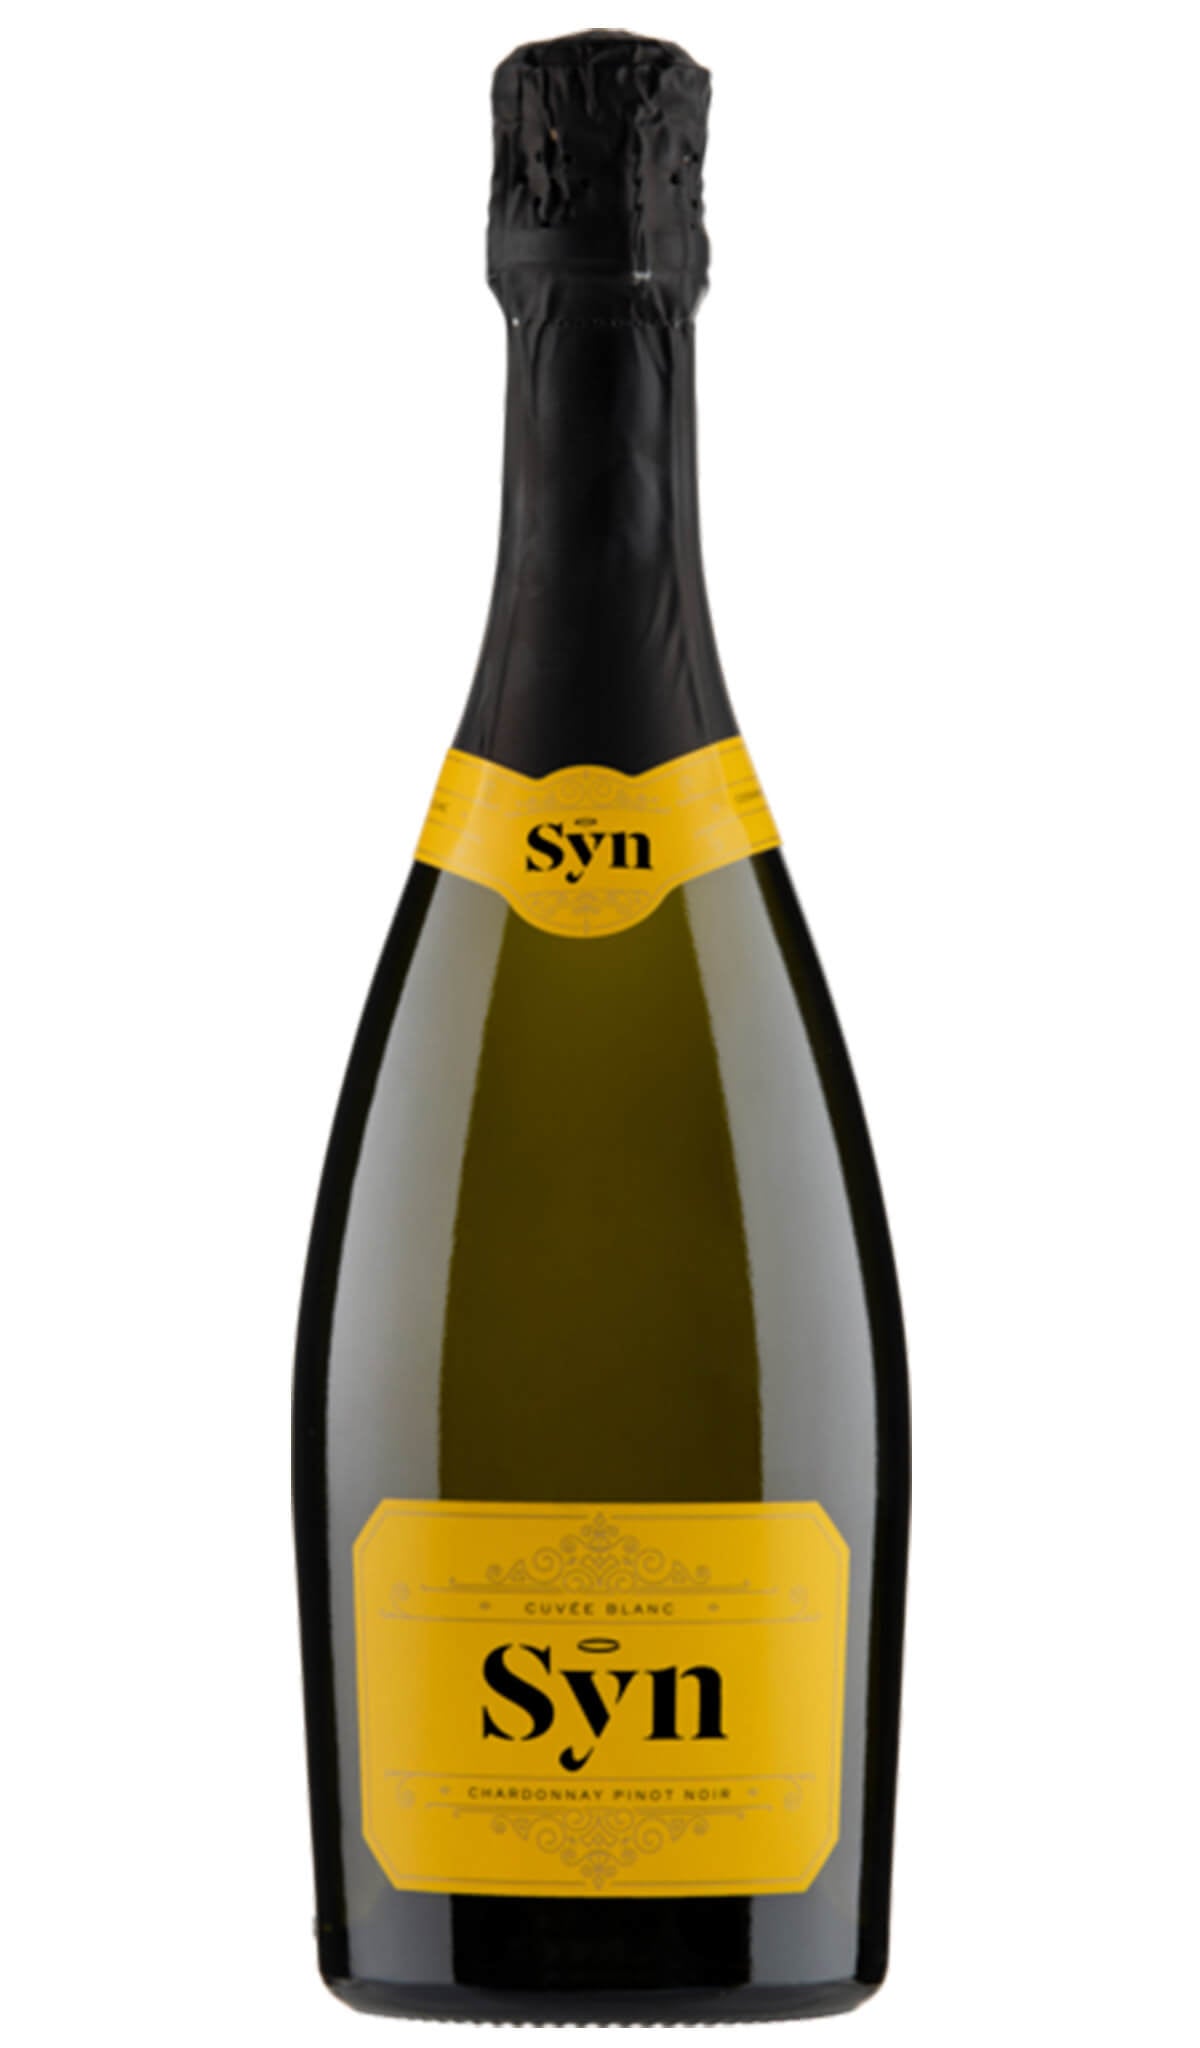 Find out more, explore the range and purchase Syn Chardonnay Pinot Noir NV (Coonawarra) online at Wine Sellers Direct - Australia's independent liquor specialists.